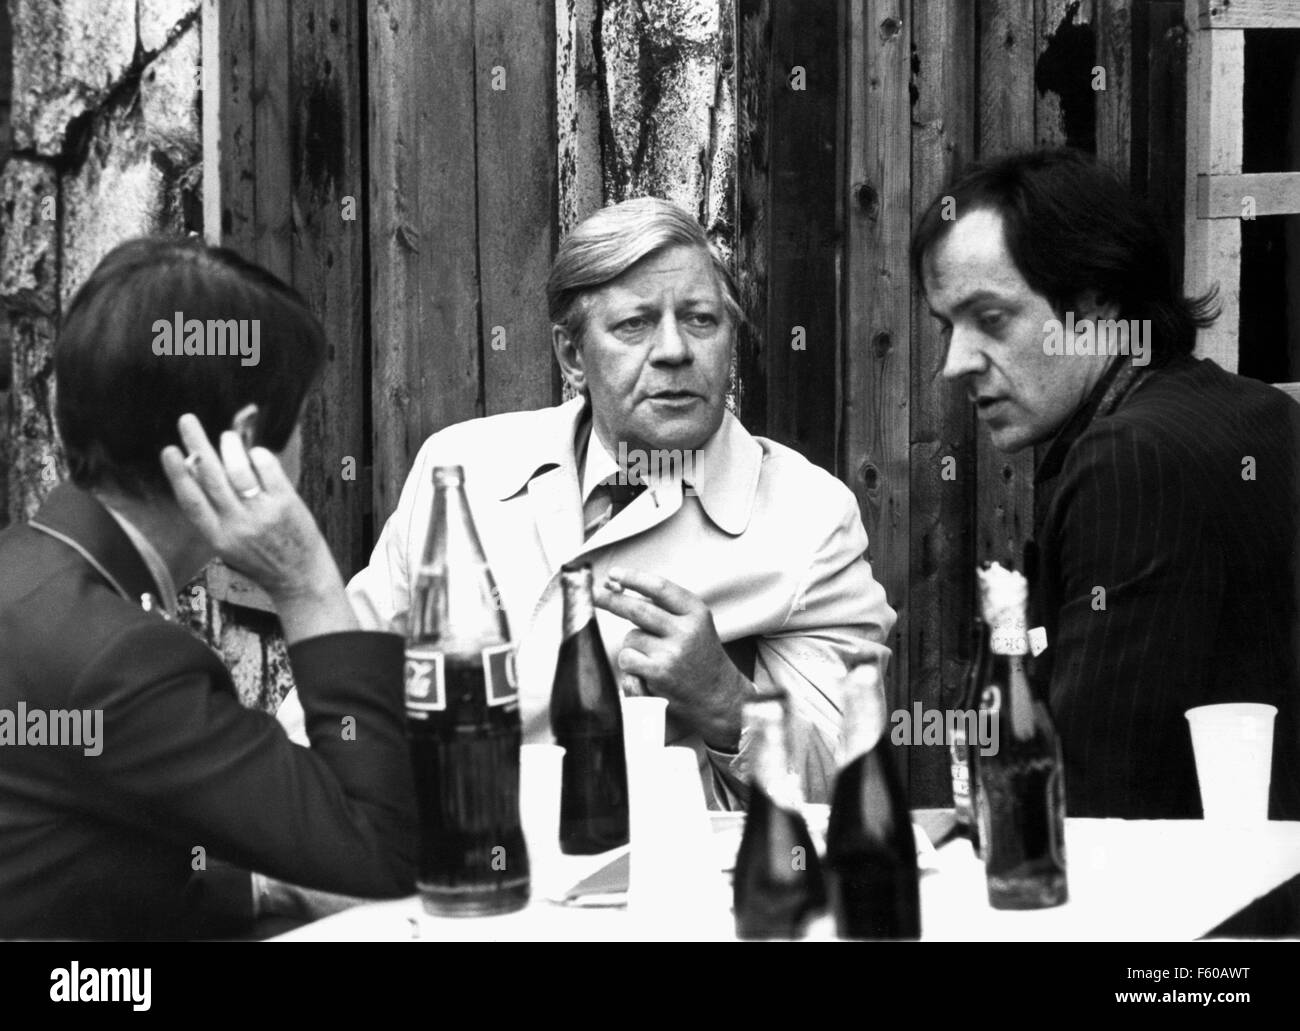 Chancellor Helmut Schmidt (center) and rock musician Udo Lindenberg (R) meet in Bad Segeberg on 31 May 1980 to exchange views. Schmidt's wife Loki on the left. Stock Photo